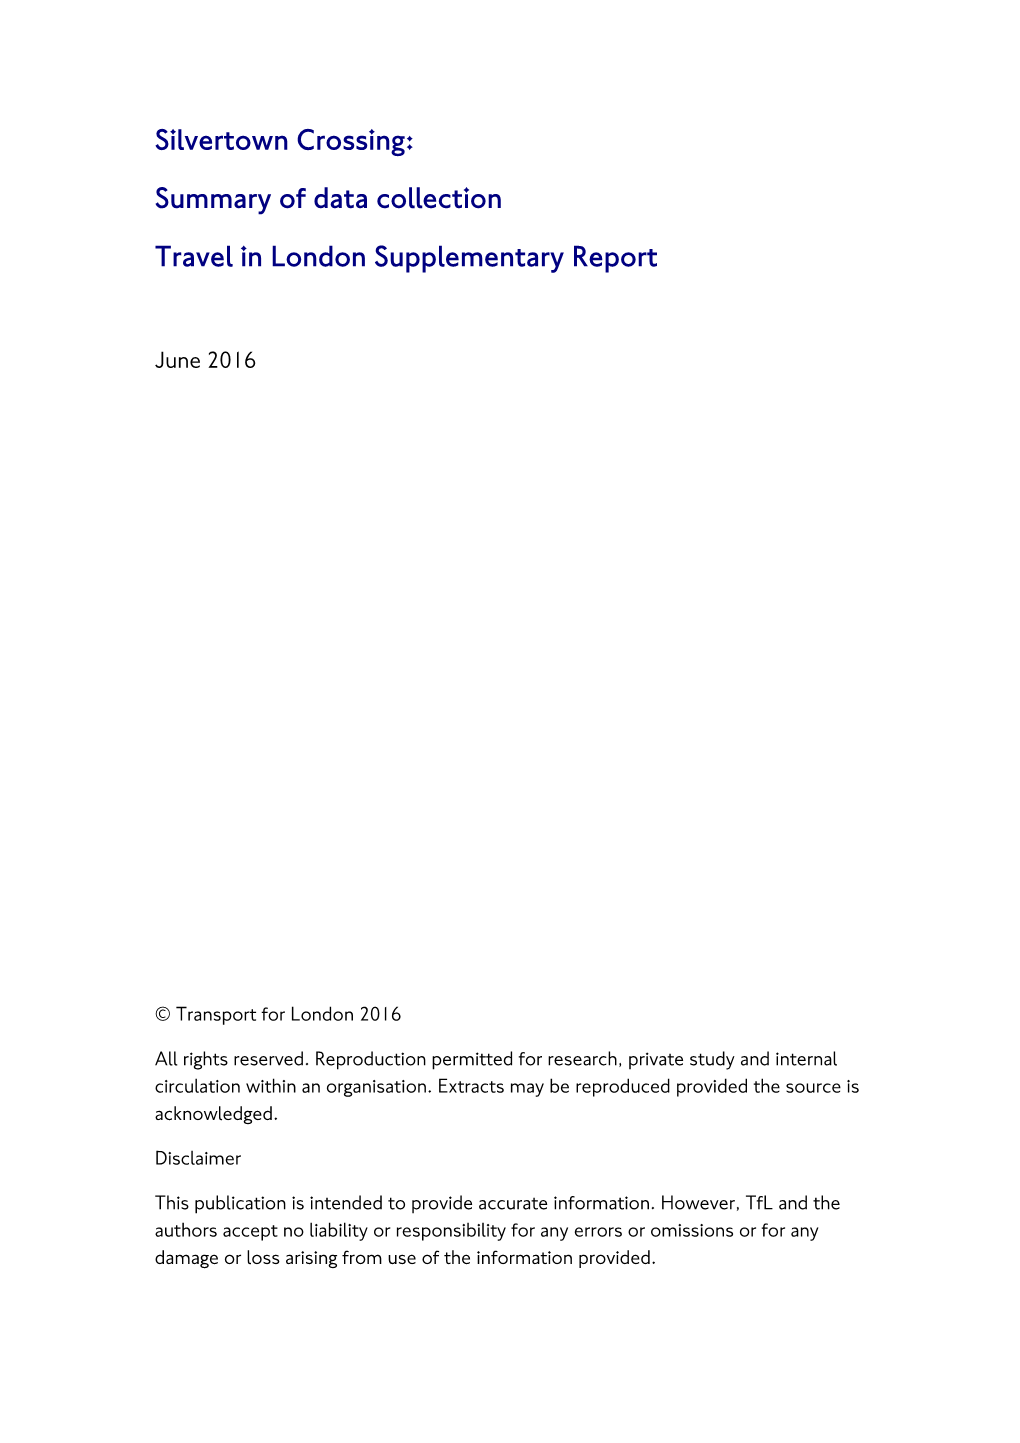 Silvertown Crossing: Summary of Data Collection Travel in London Supplementary Report